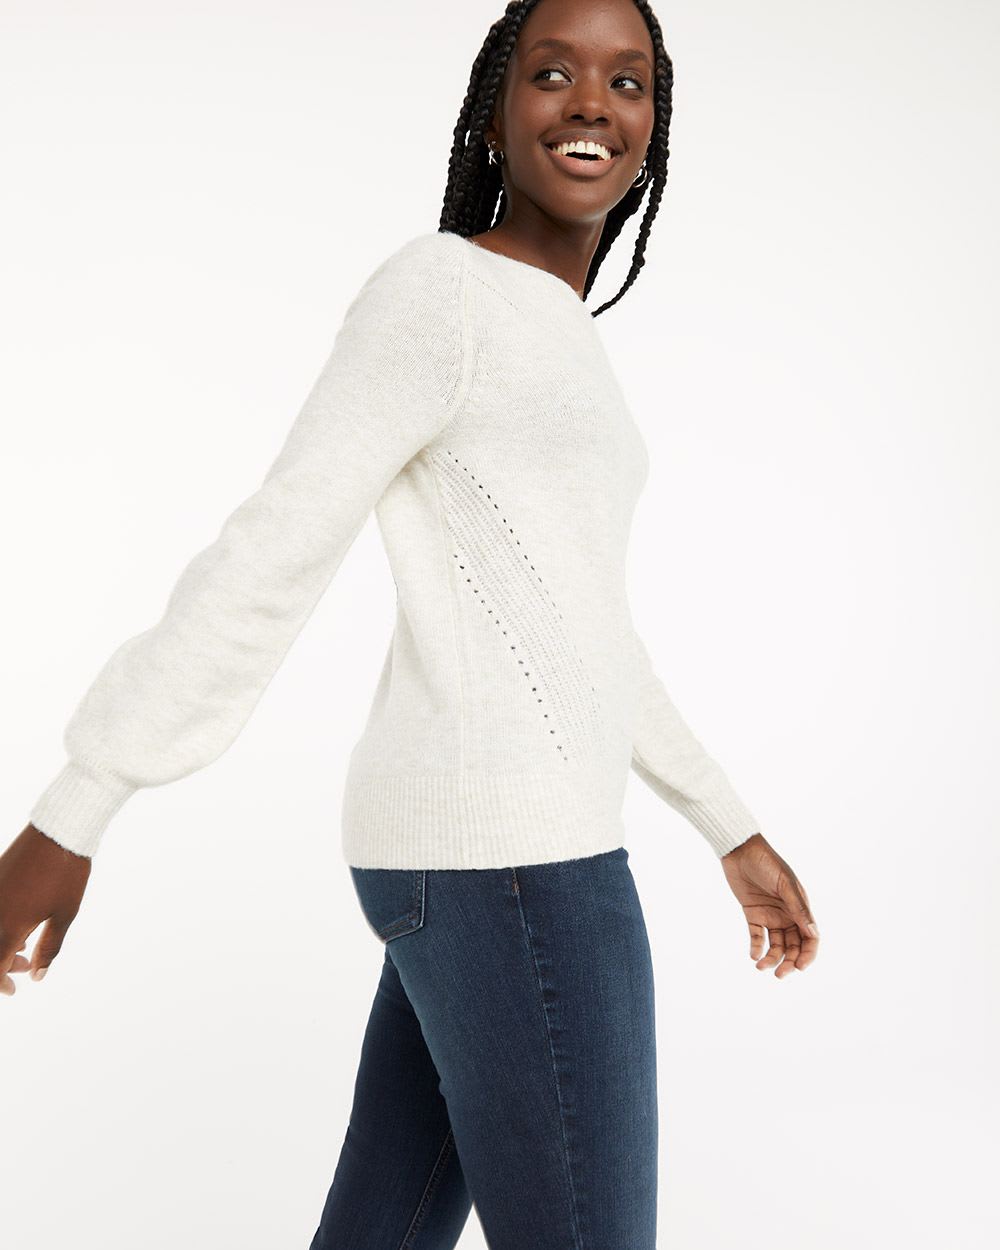 Long-Sleeve Boat-Neck Pullover with Pointelle Stitches